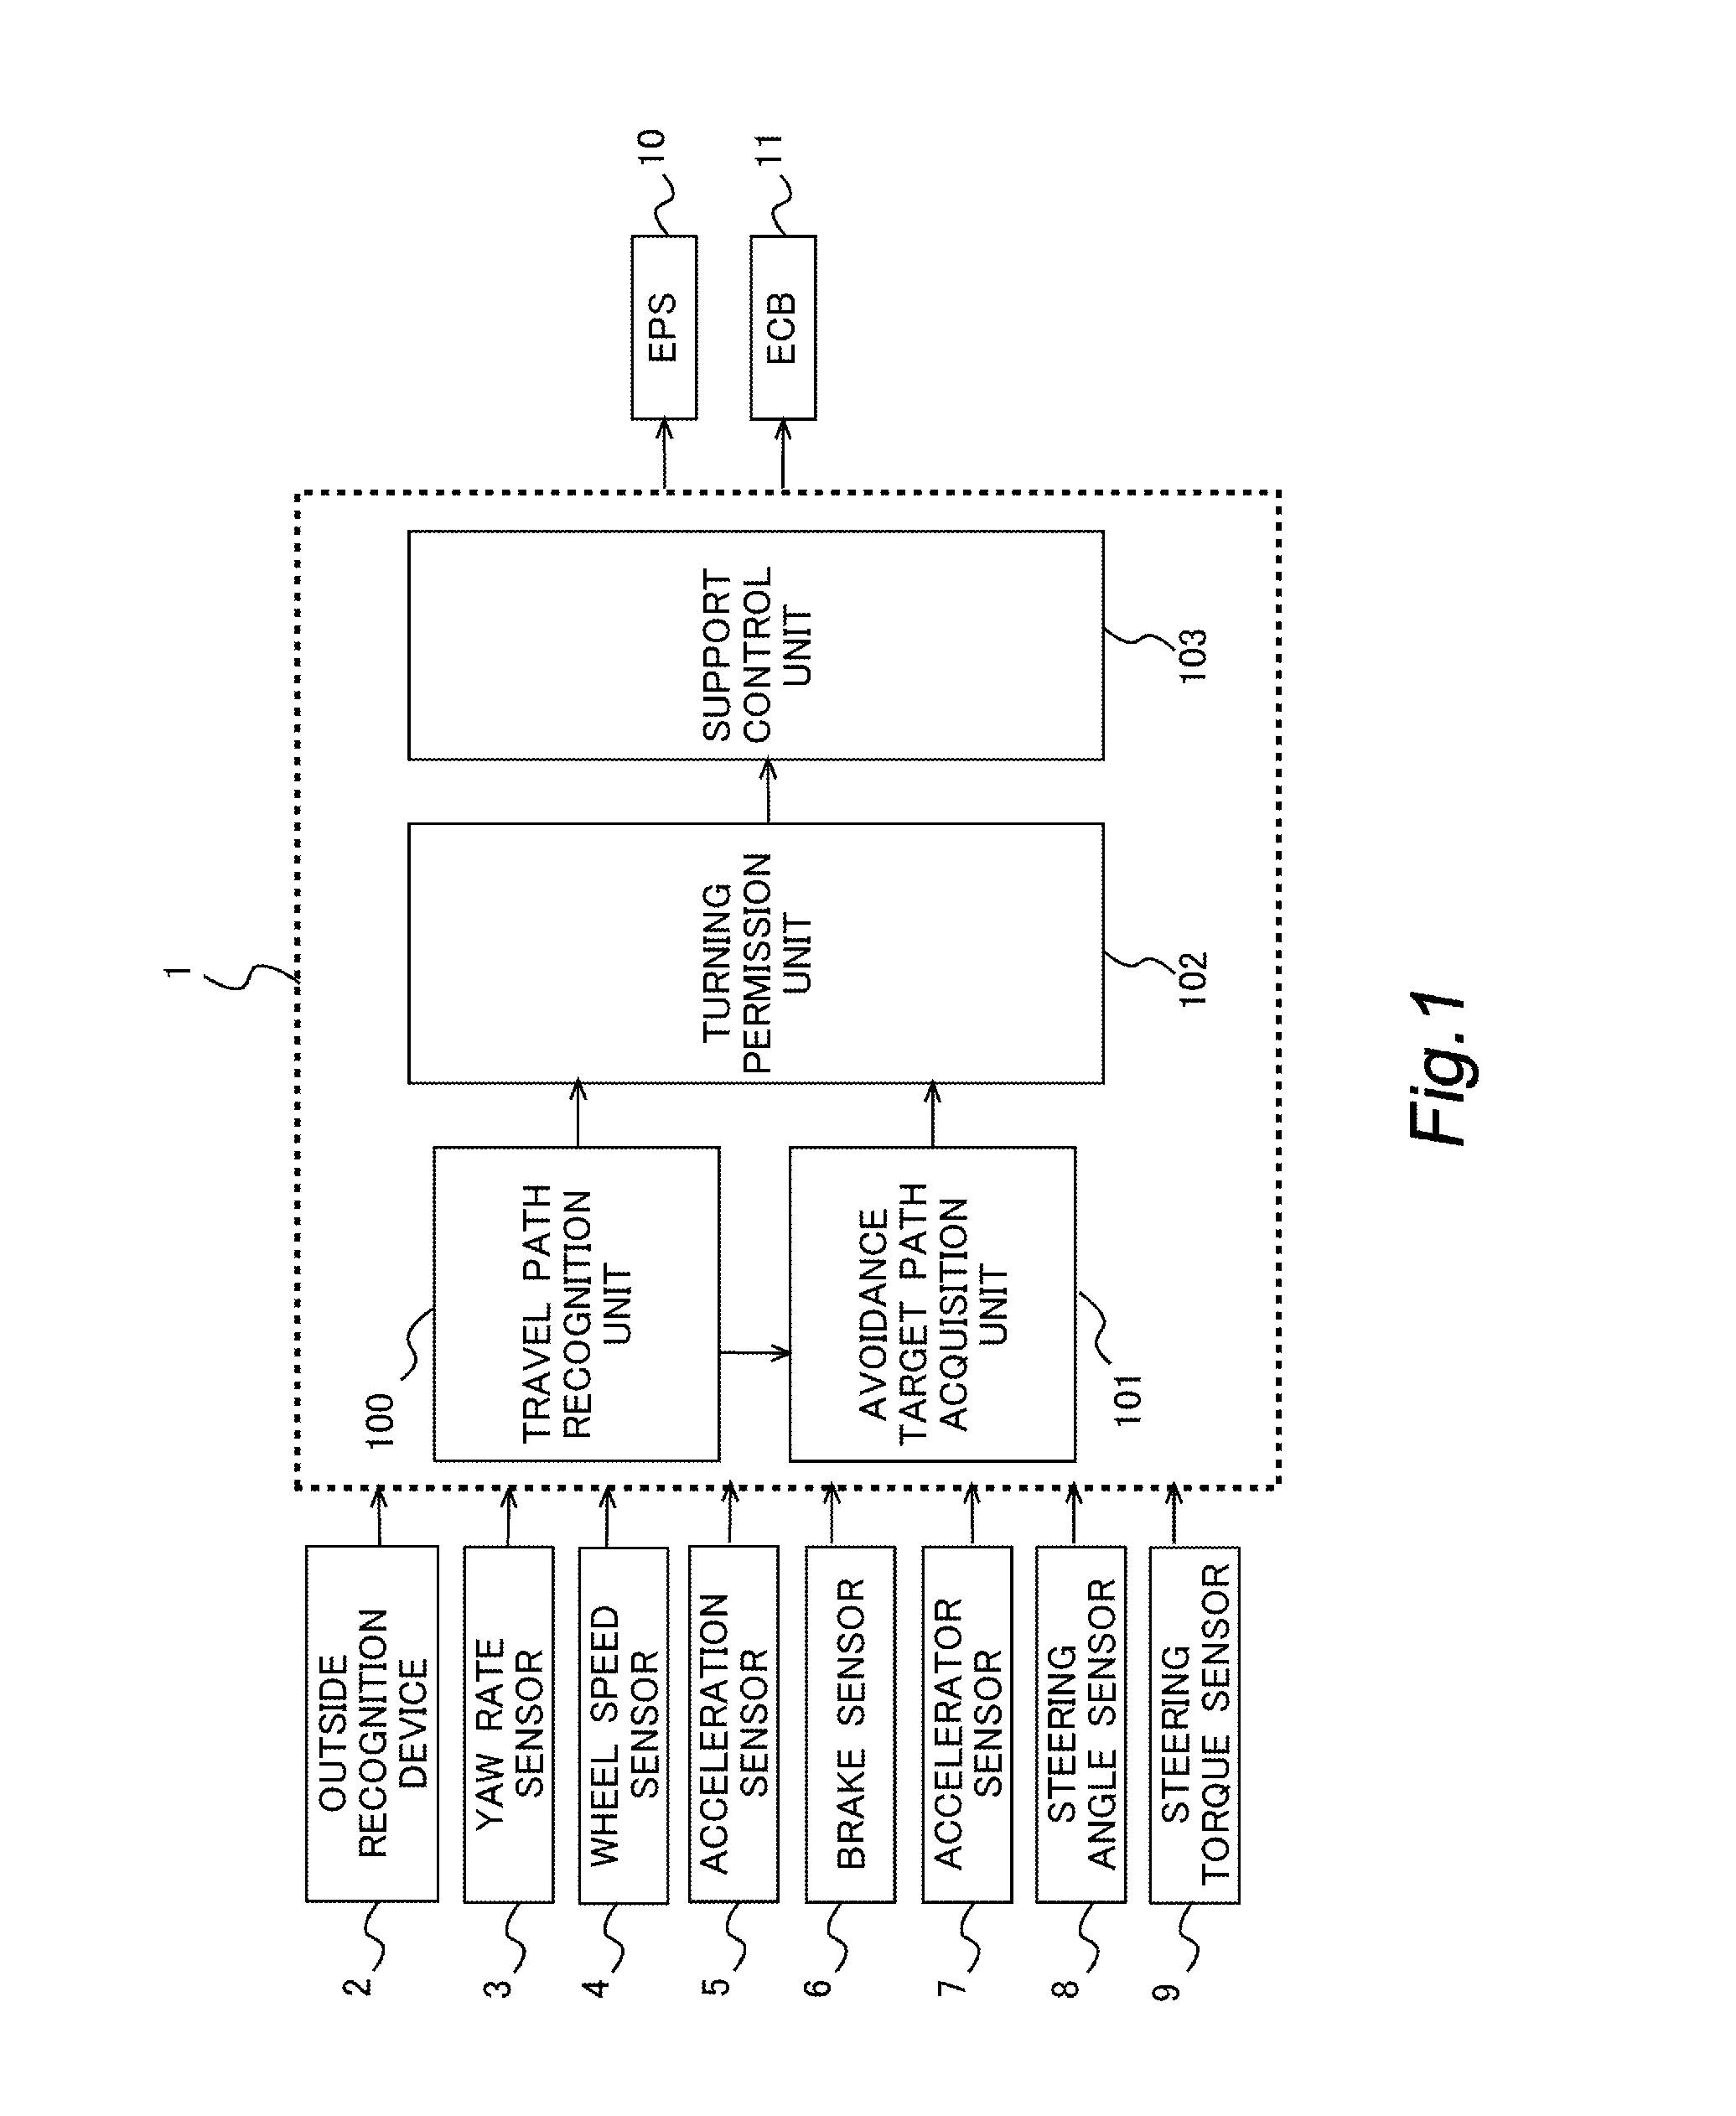 Driving support system for a vehicle